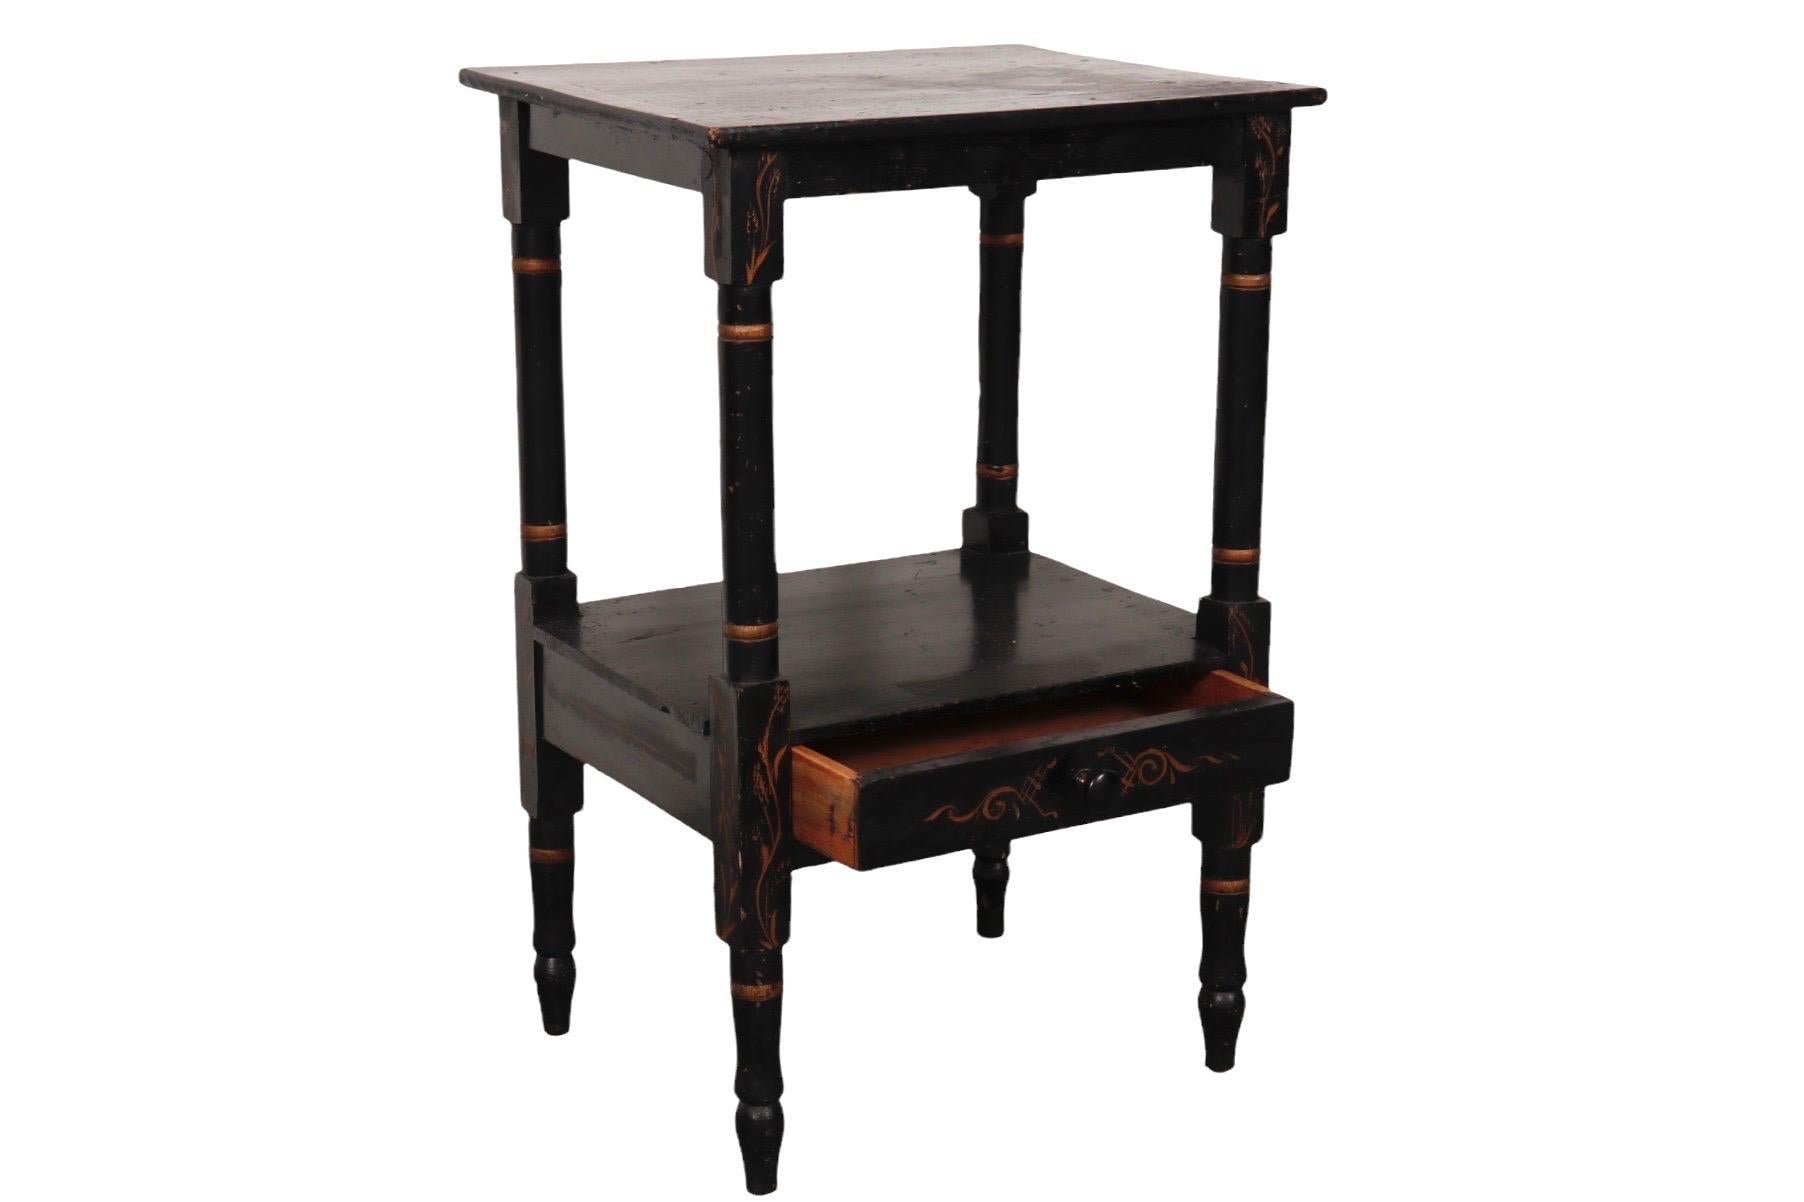 A Chinoiserie side table with a single drawer. Hand painted black and decorated with a simple plant motif and scrolled details in gold. Turned legs terminate in blunt arrow feet.